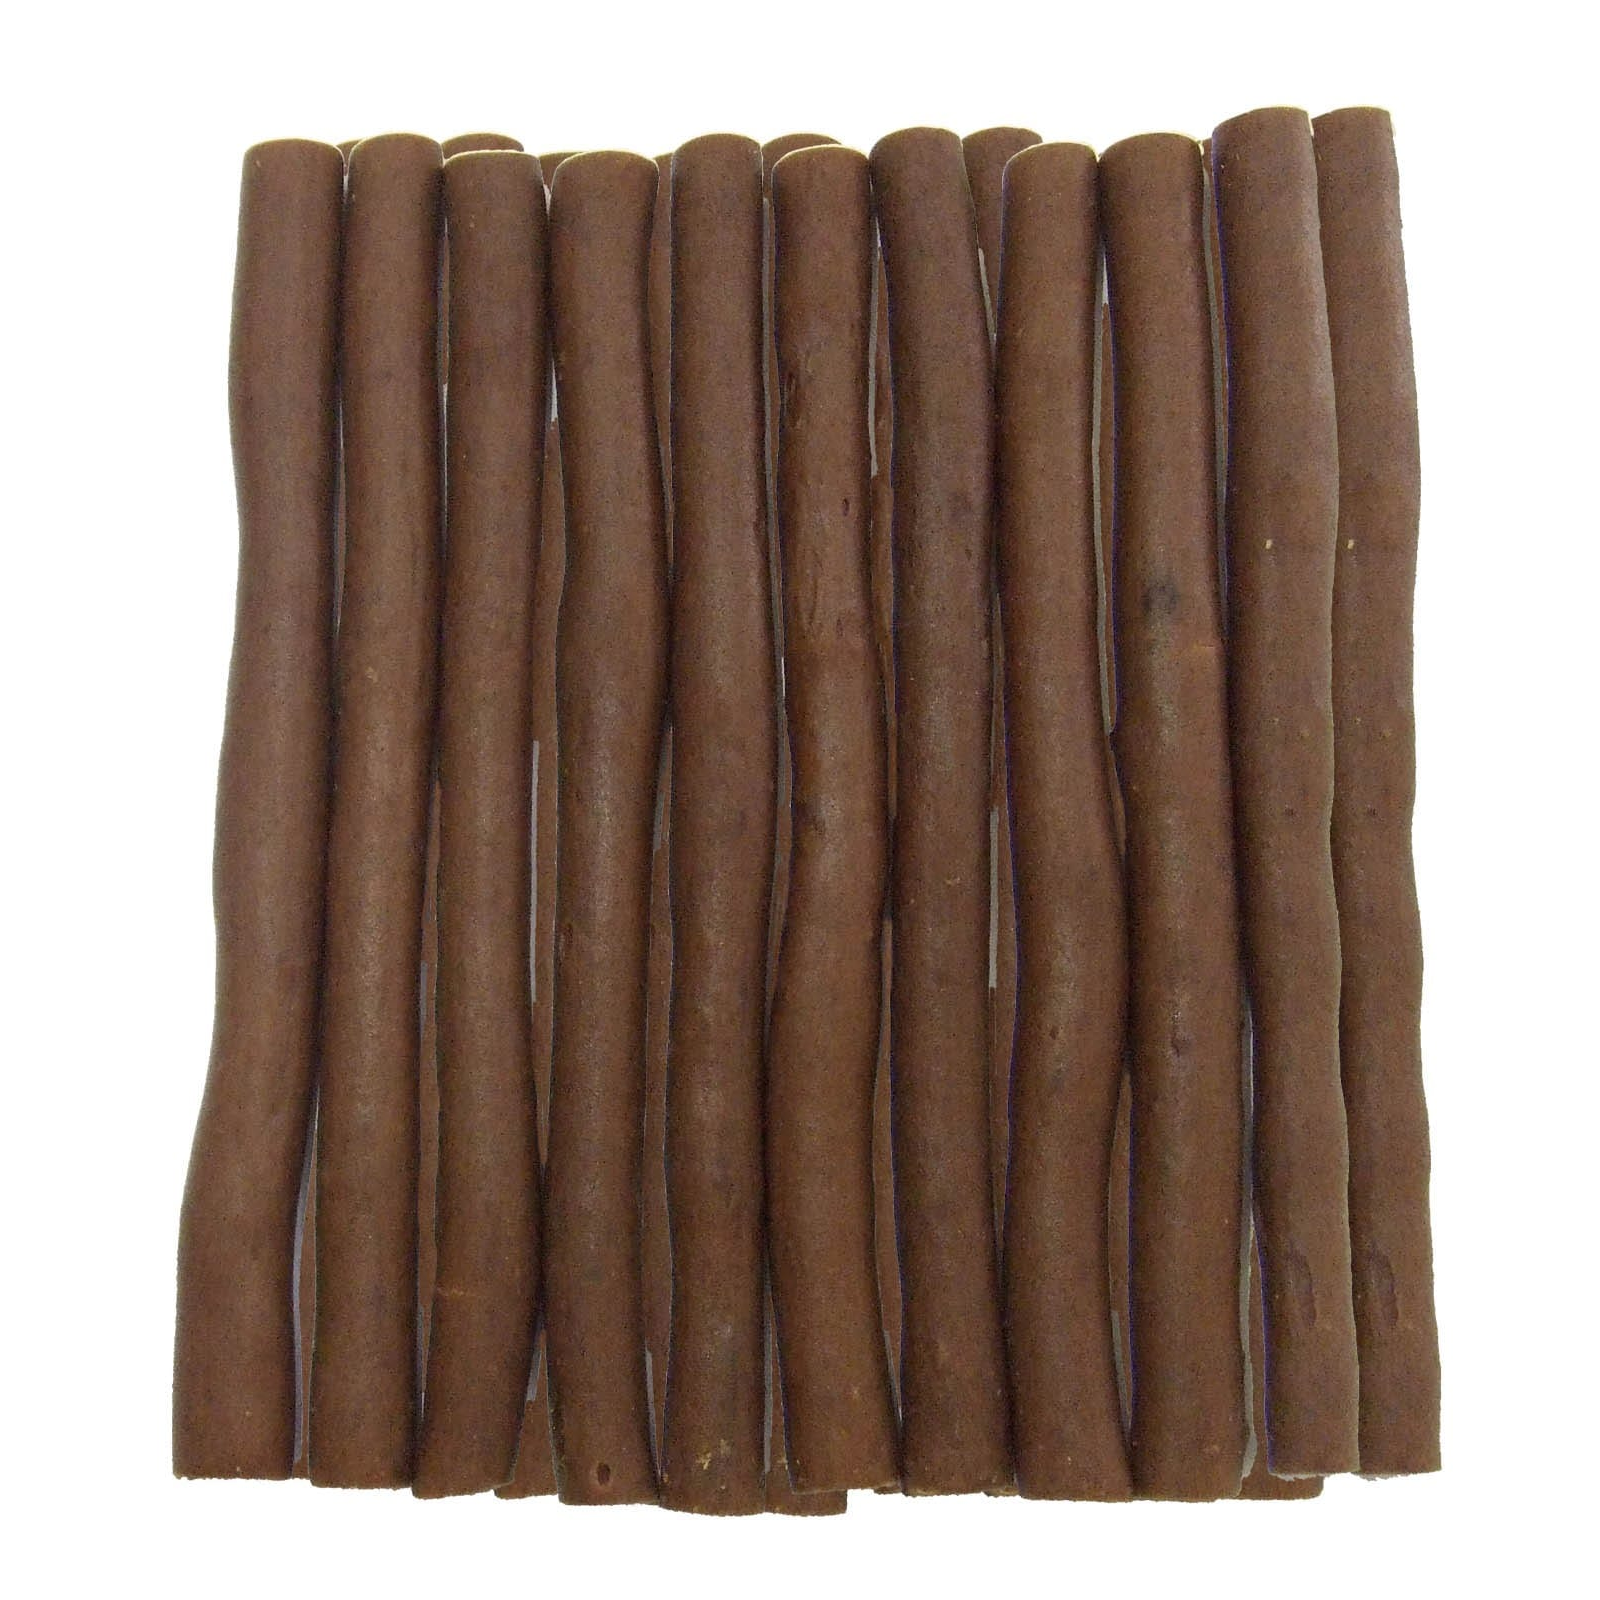 Pet Munchies Beef Liver Sticks Product